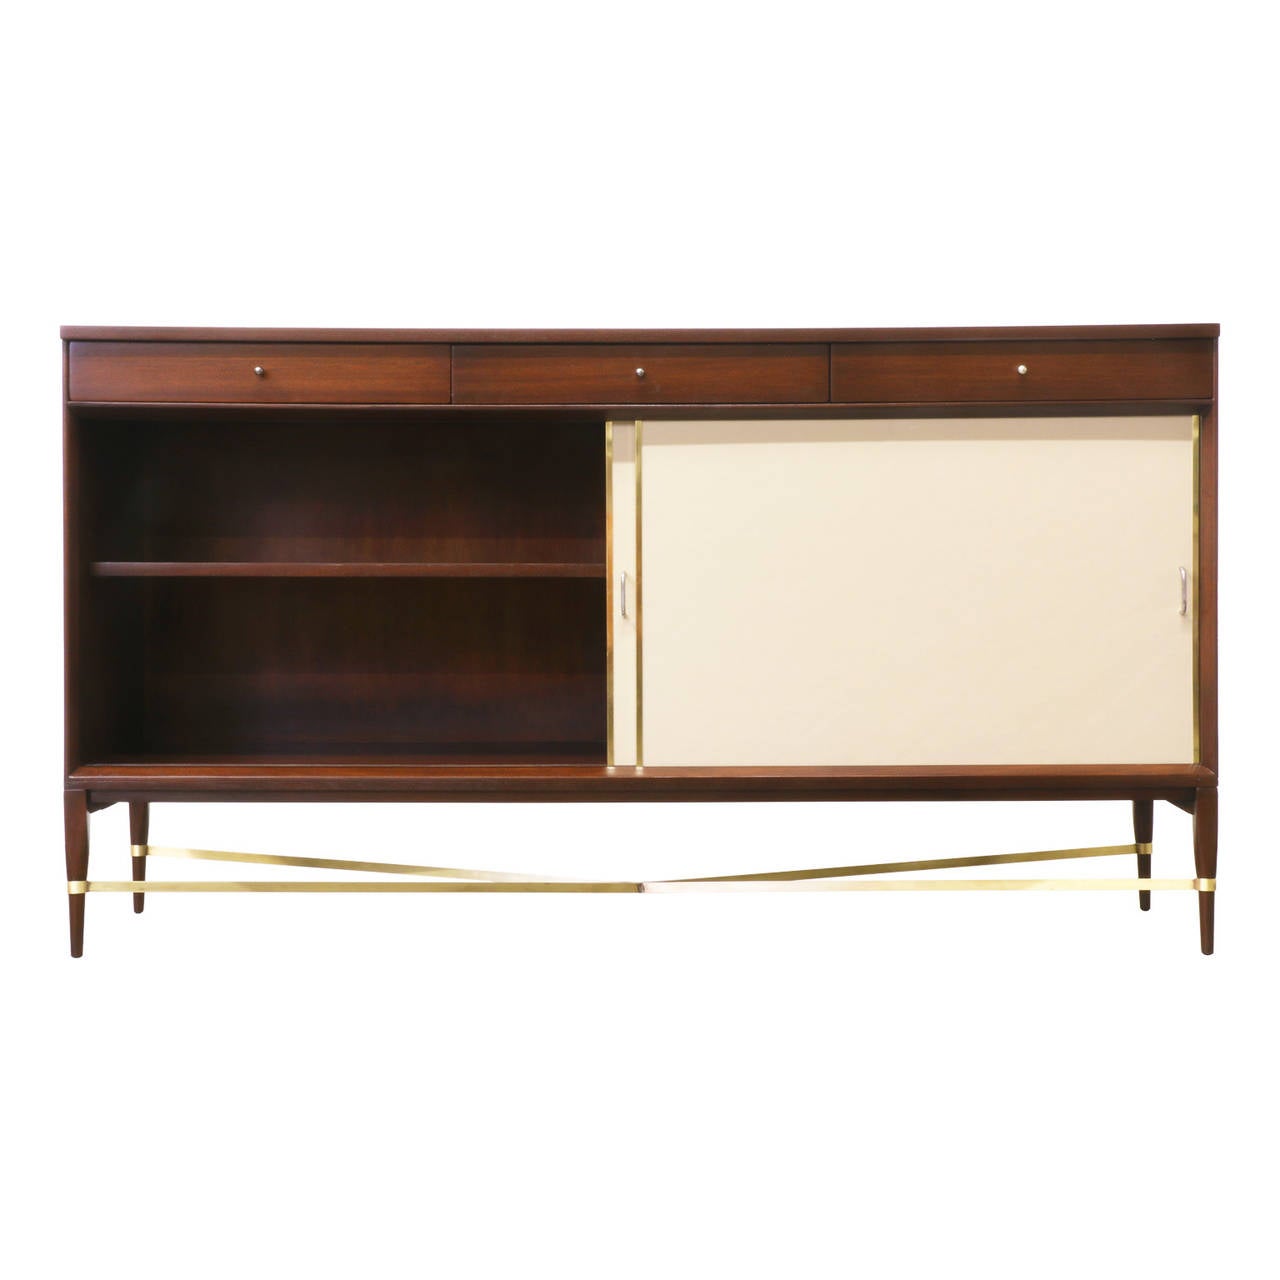 American Paul McCobb Brass and Leather Credenza for Calvin Group